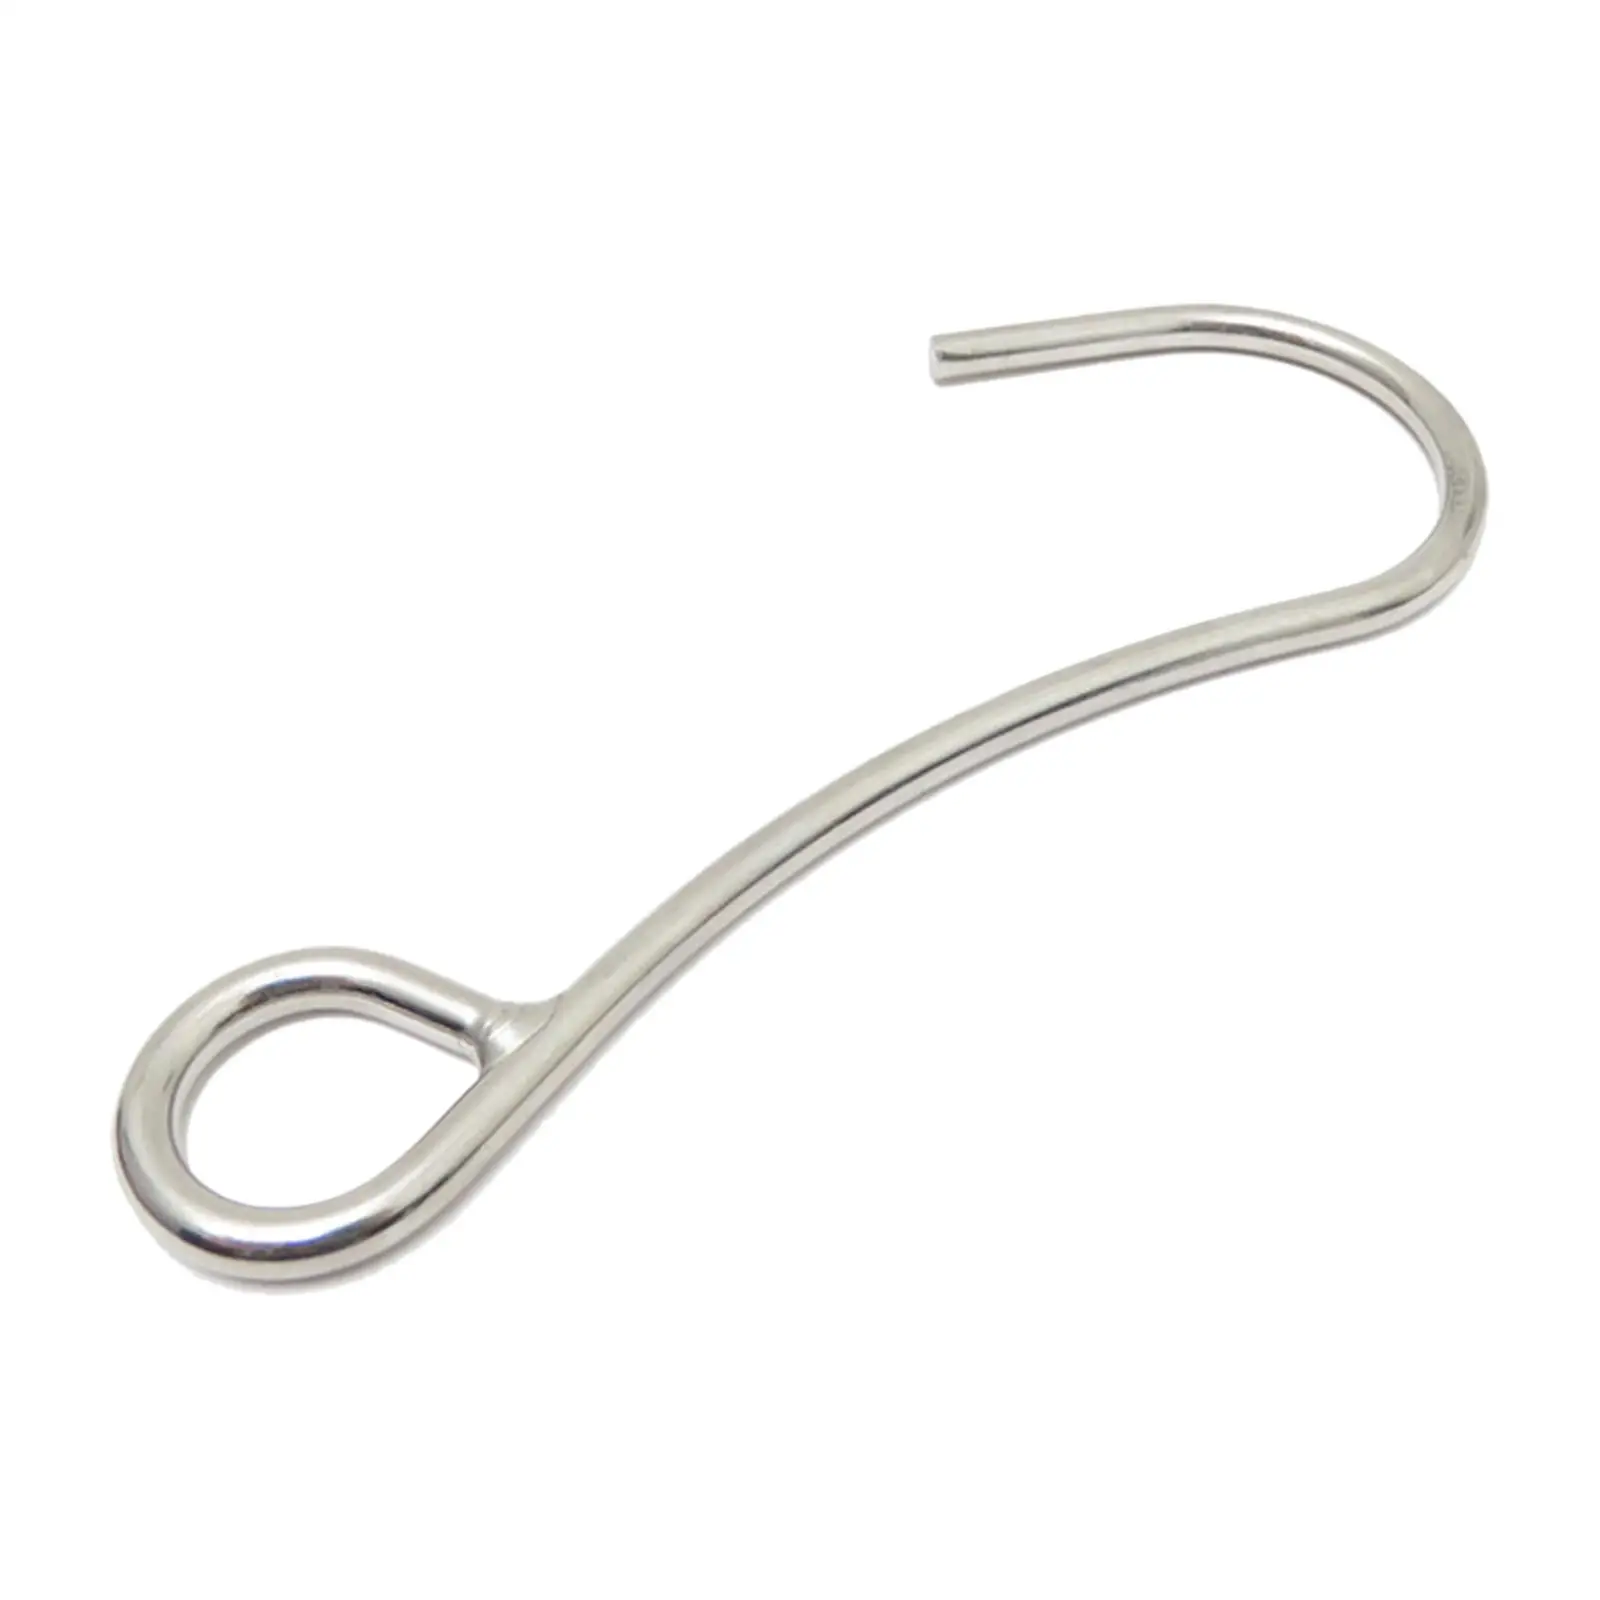 

Stainless Steel Scuba Diving Reef Hook, Practical Dive Current Single Hook for Cave Diving Underwater Safety Equipment Diver